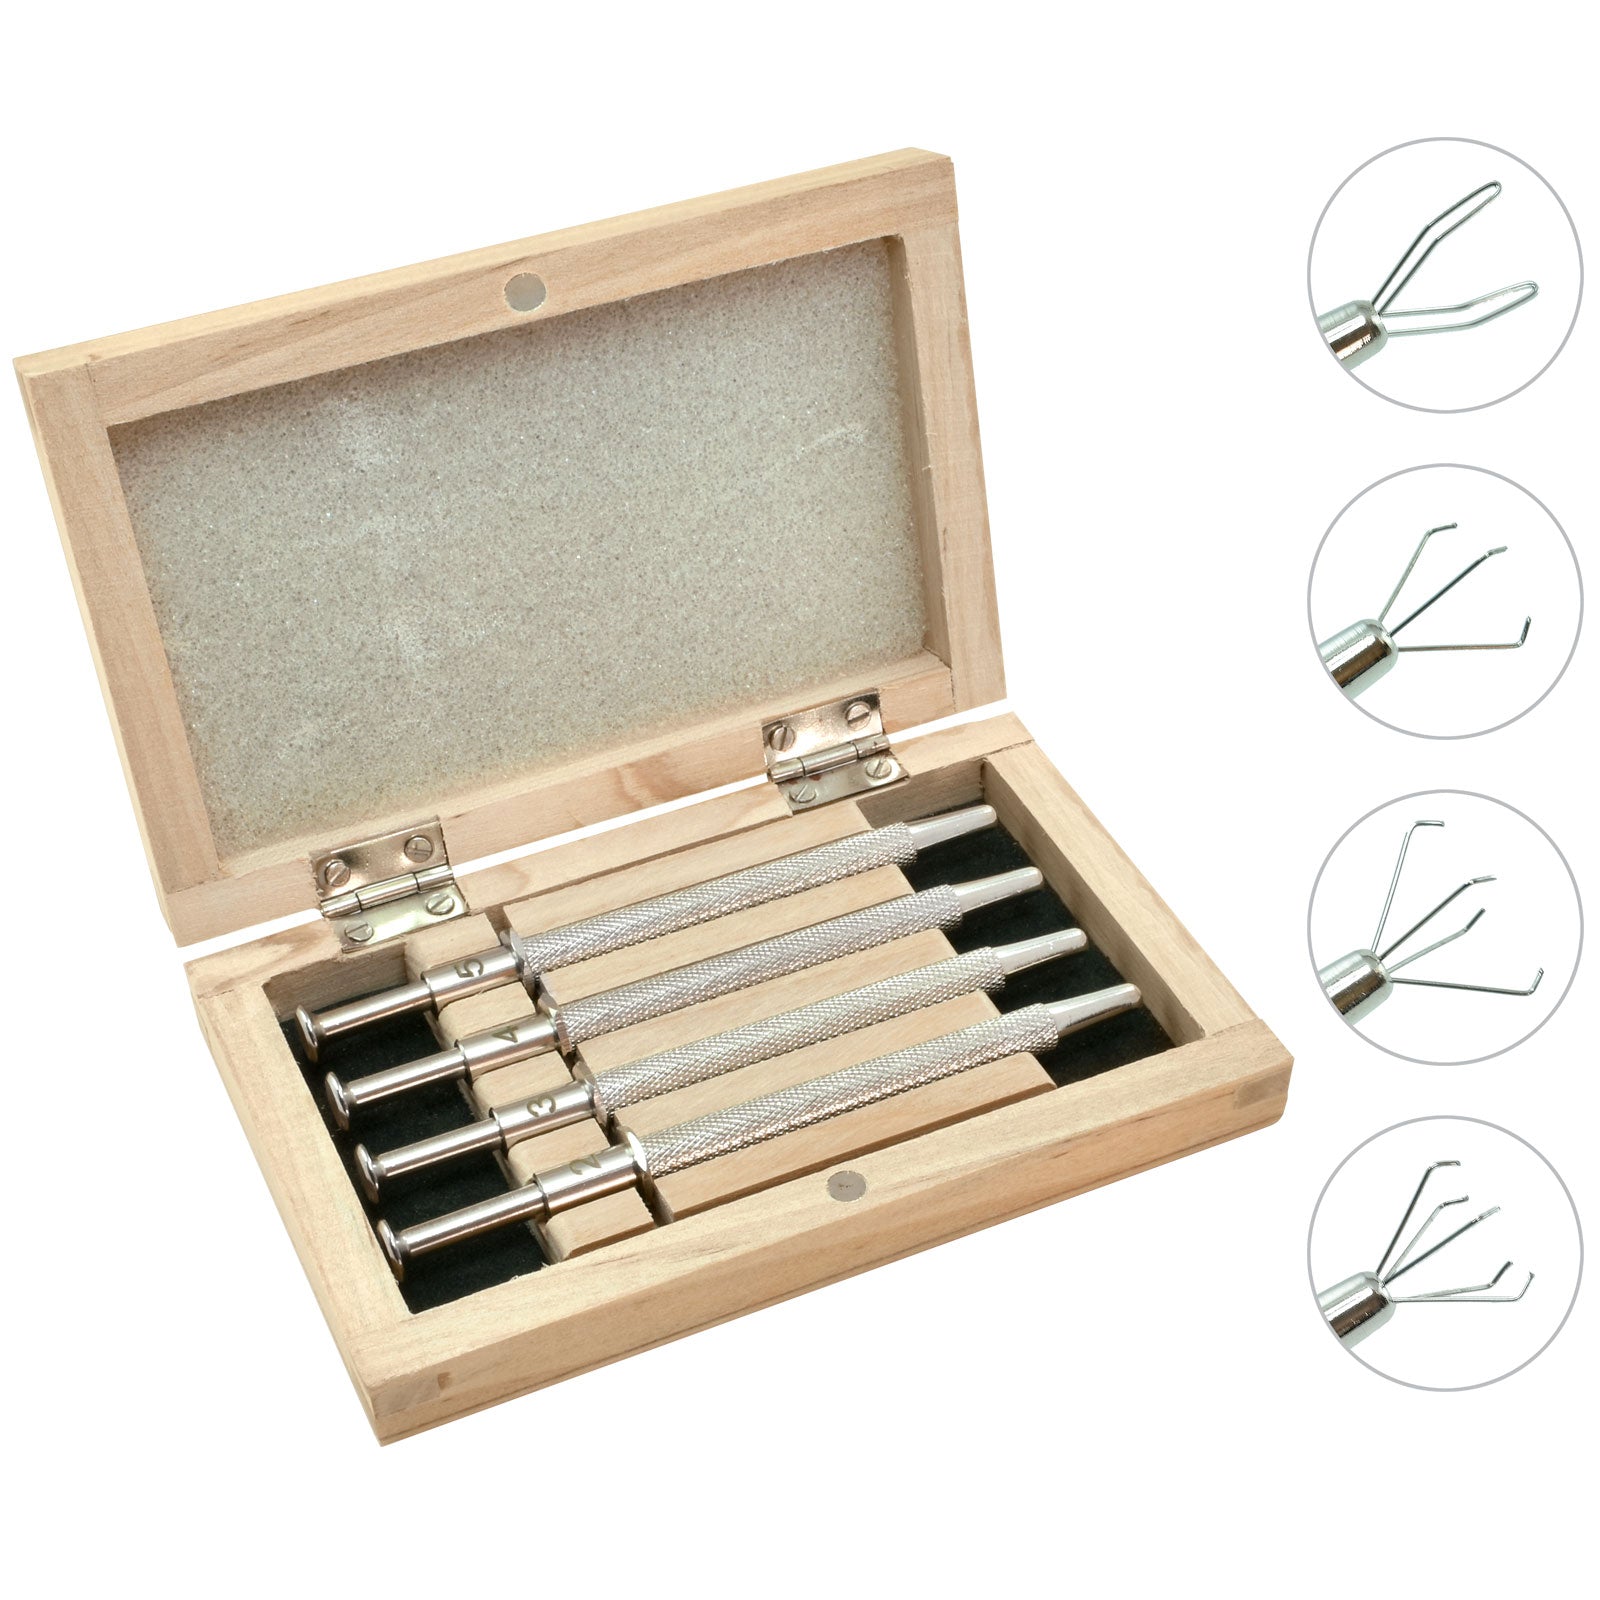 4-Piece Gripster Grabbing/Holding Tool Set